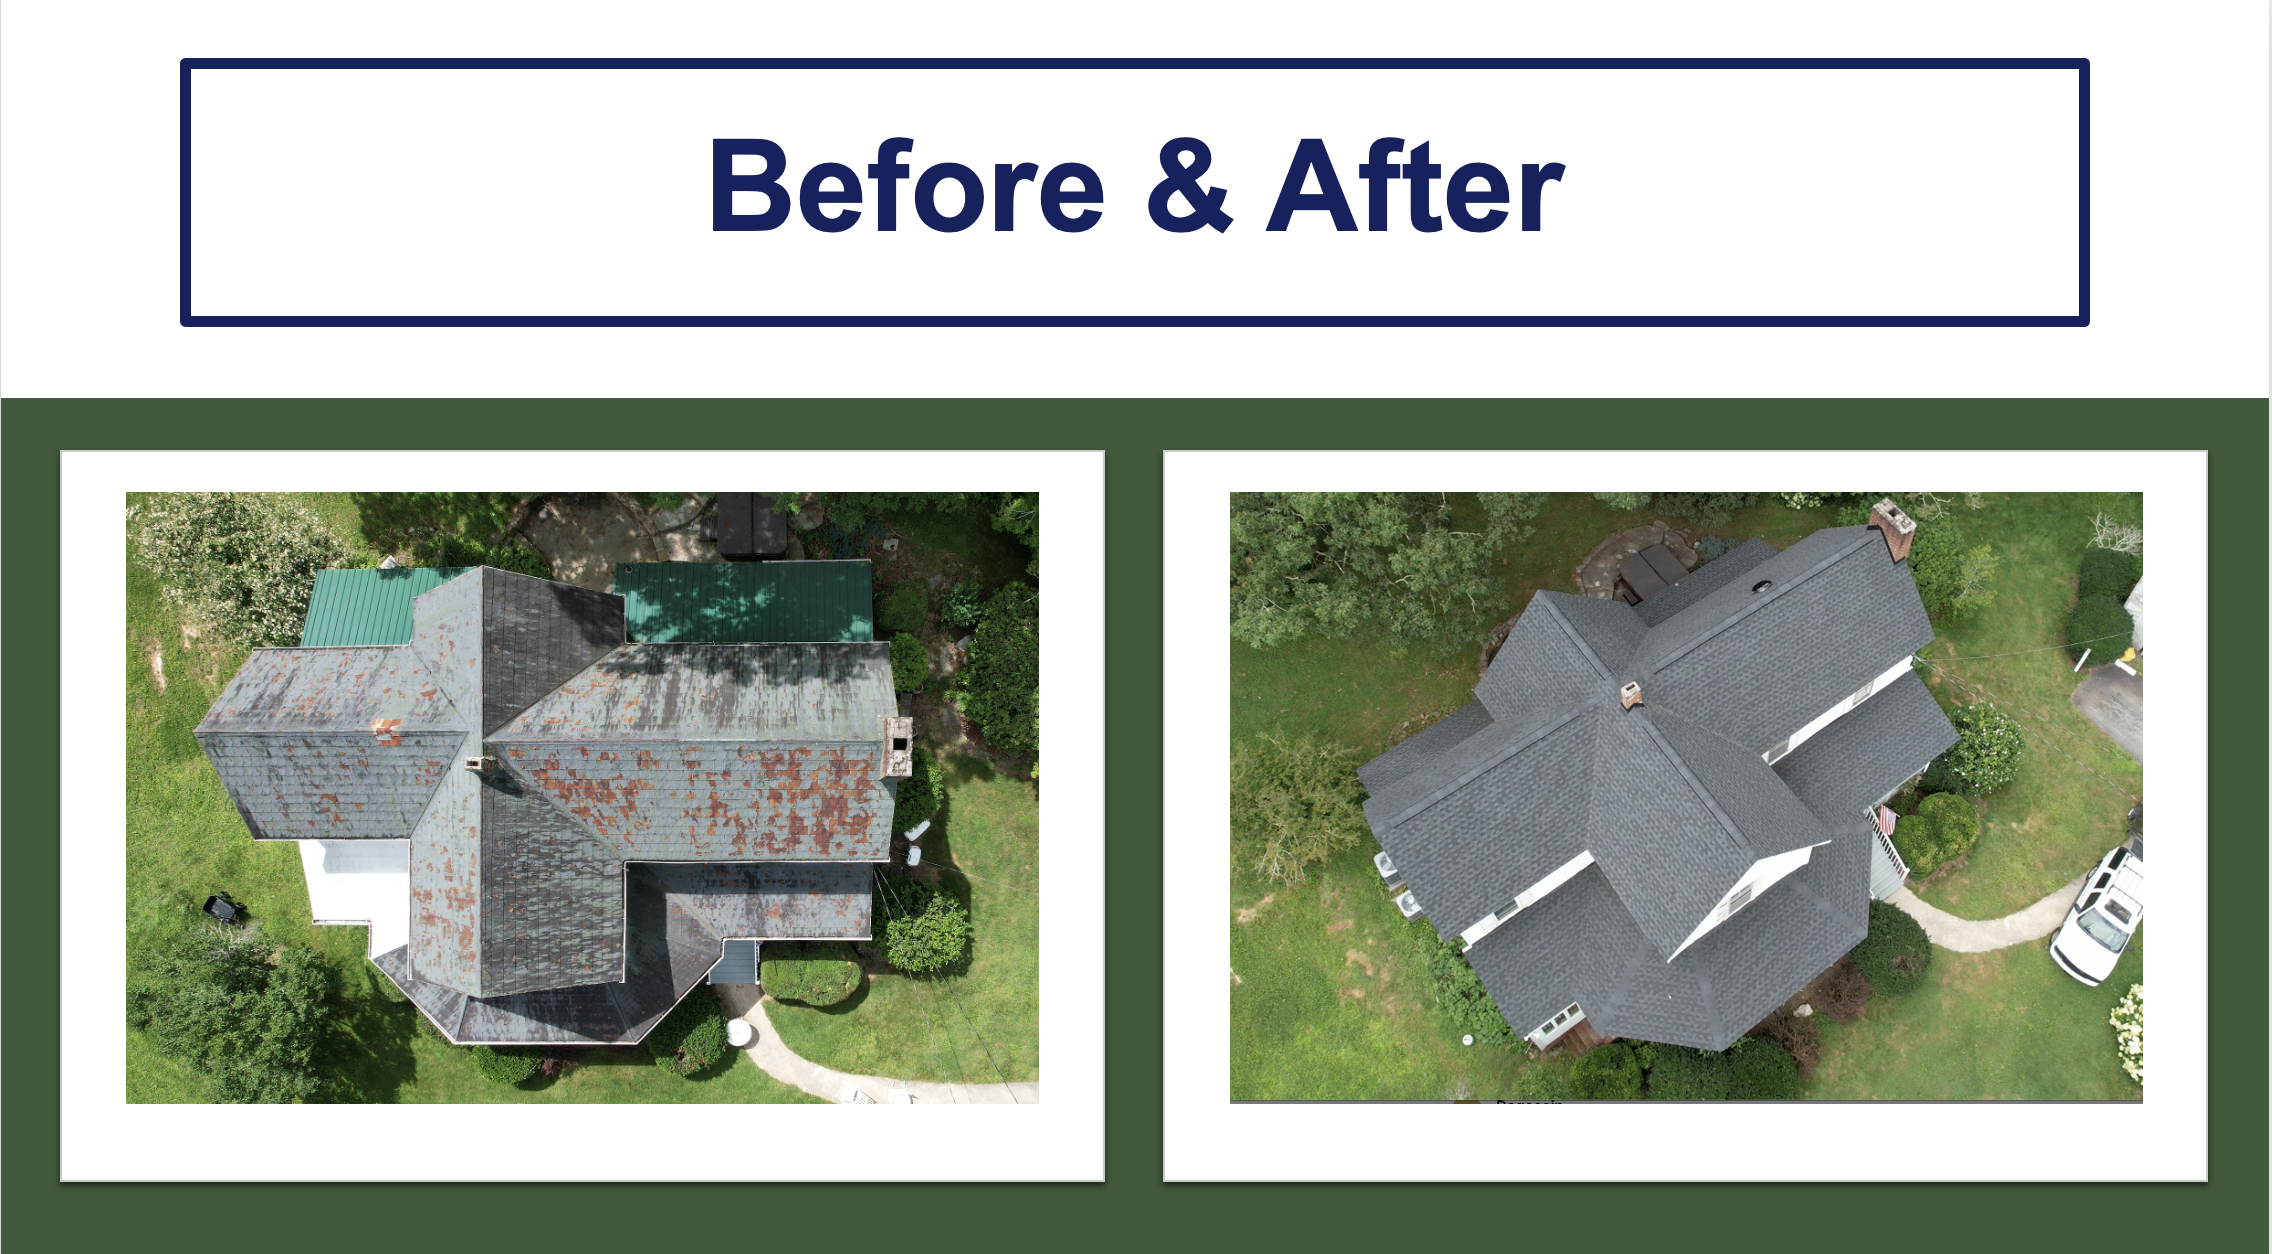 Showing the significant curb appeal improvement and home value improvement that a roof replacement from Elite Roof and Solar can have through before and after drone images.